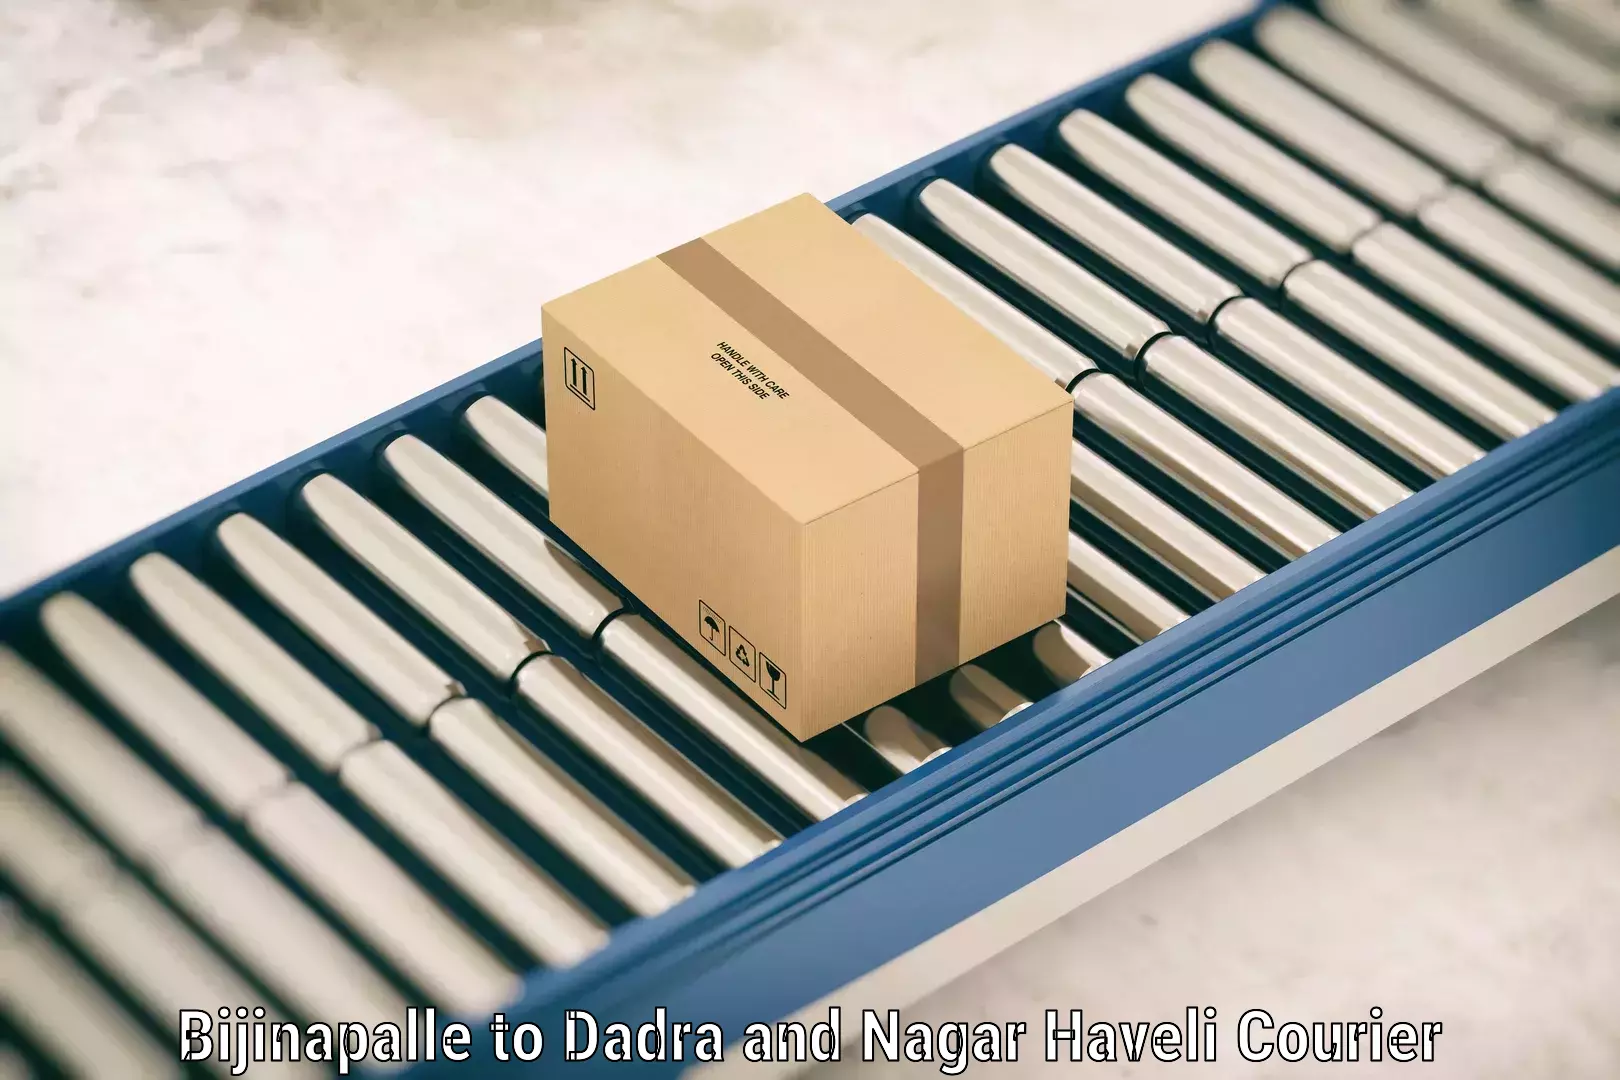 Luggage shipping strategy in Bijinapalle to Dadra and Nagar Haveli